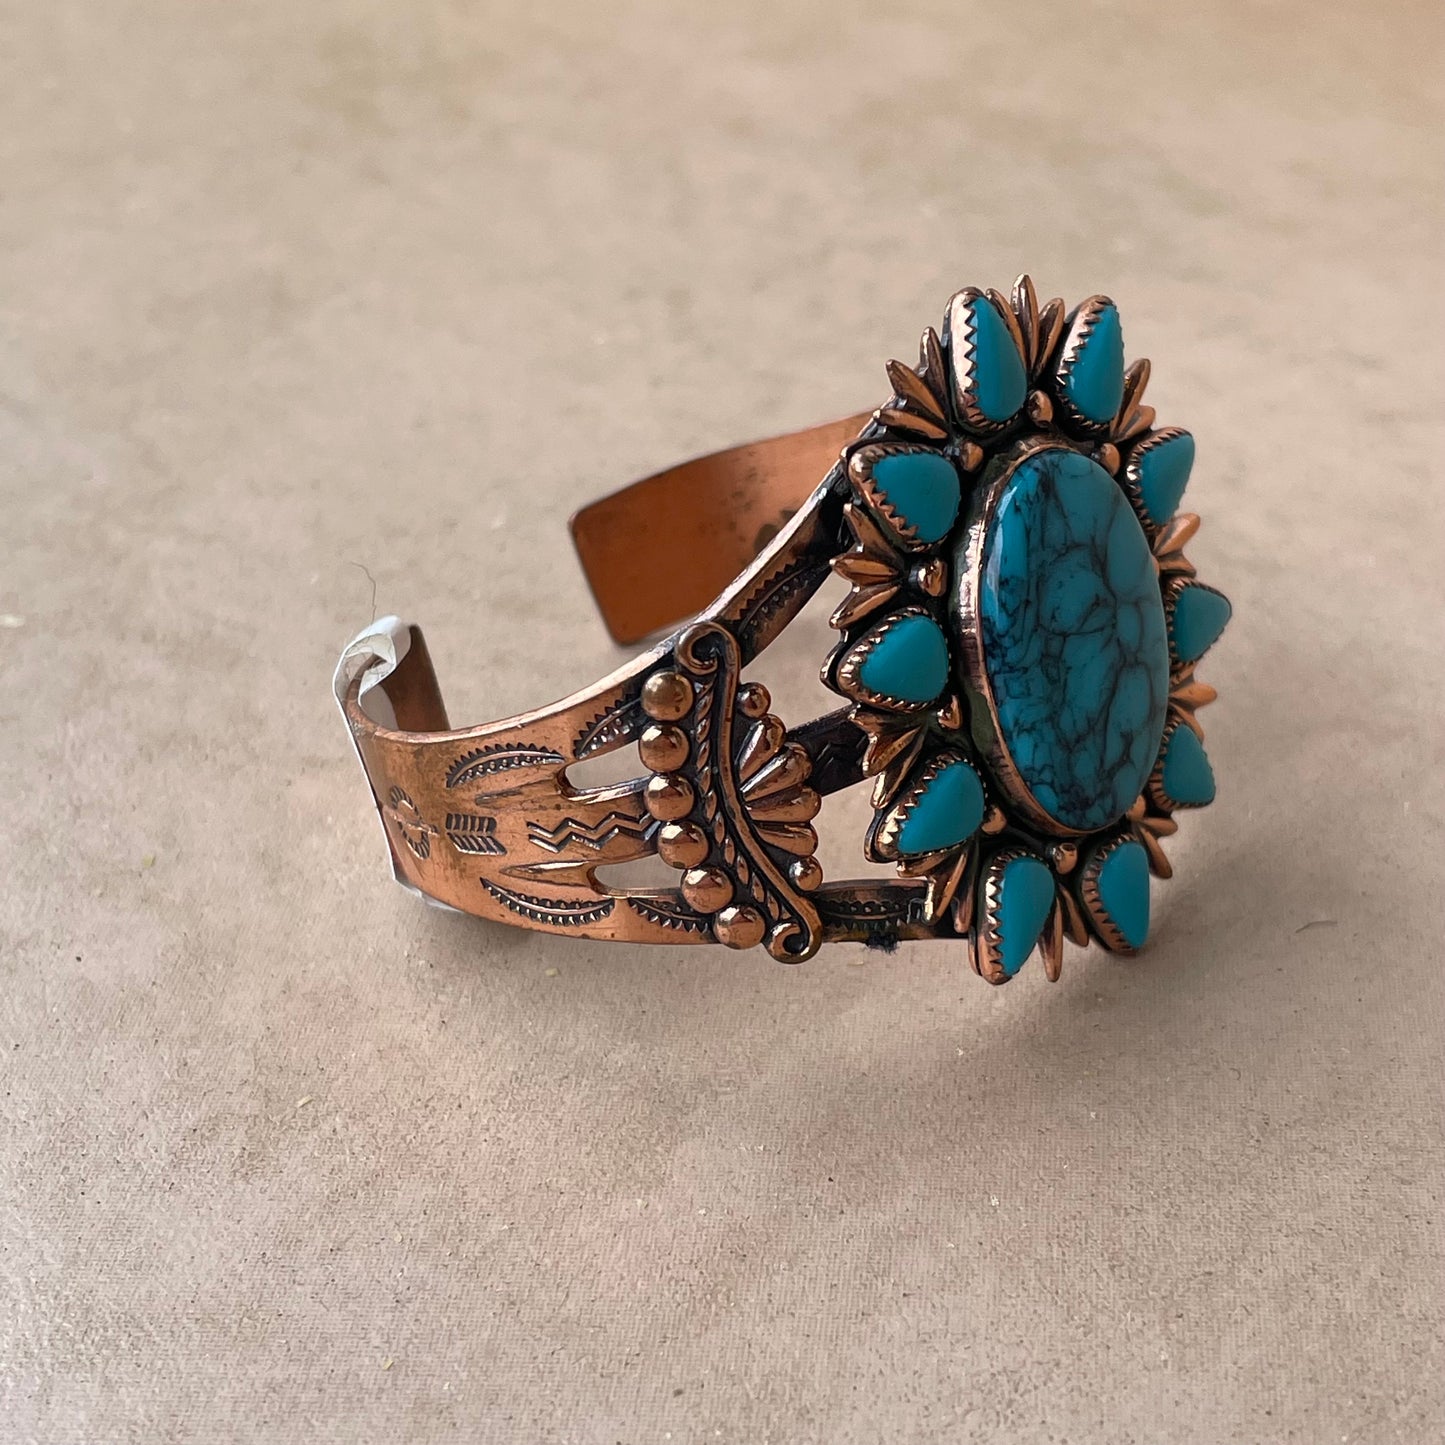 VTG Copper and Faux Turquoise Cuff